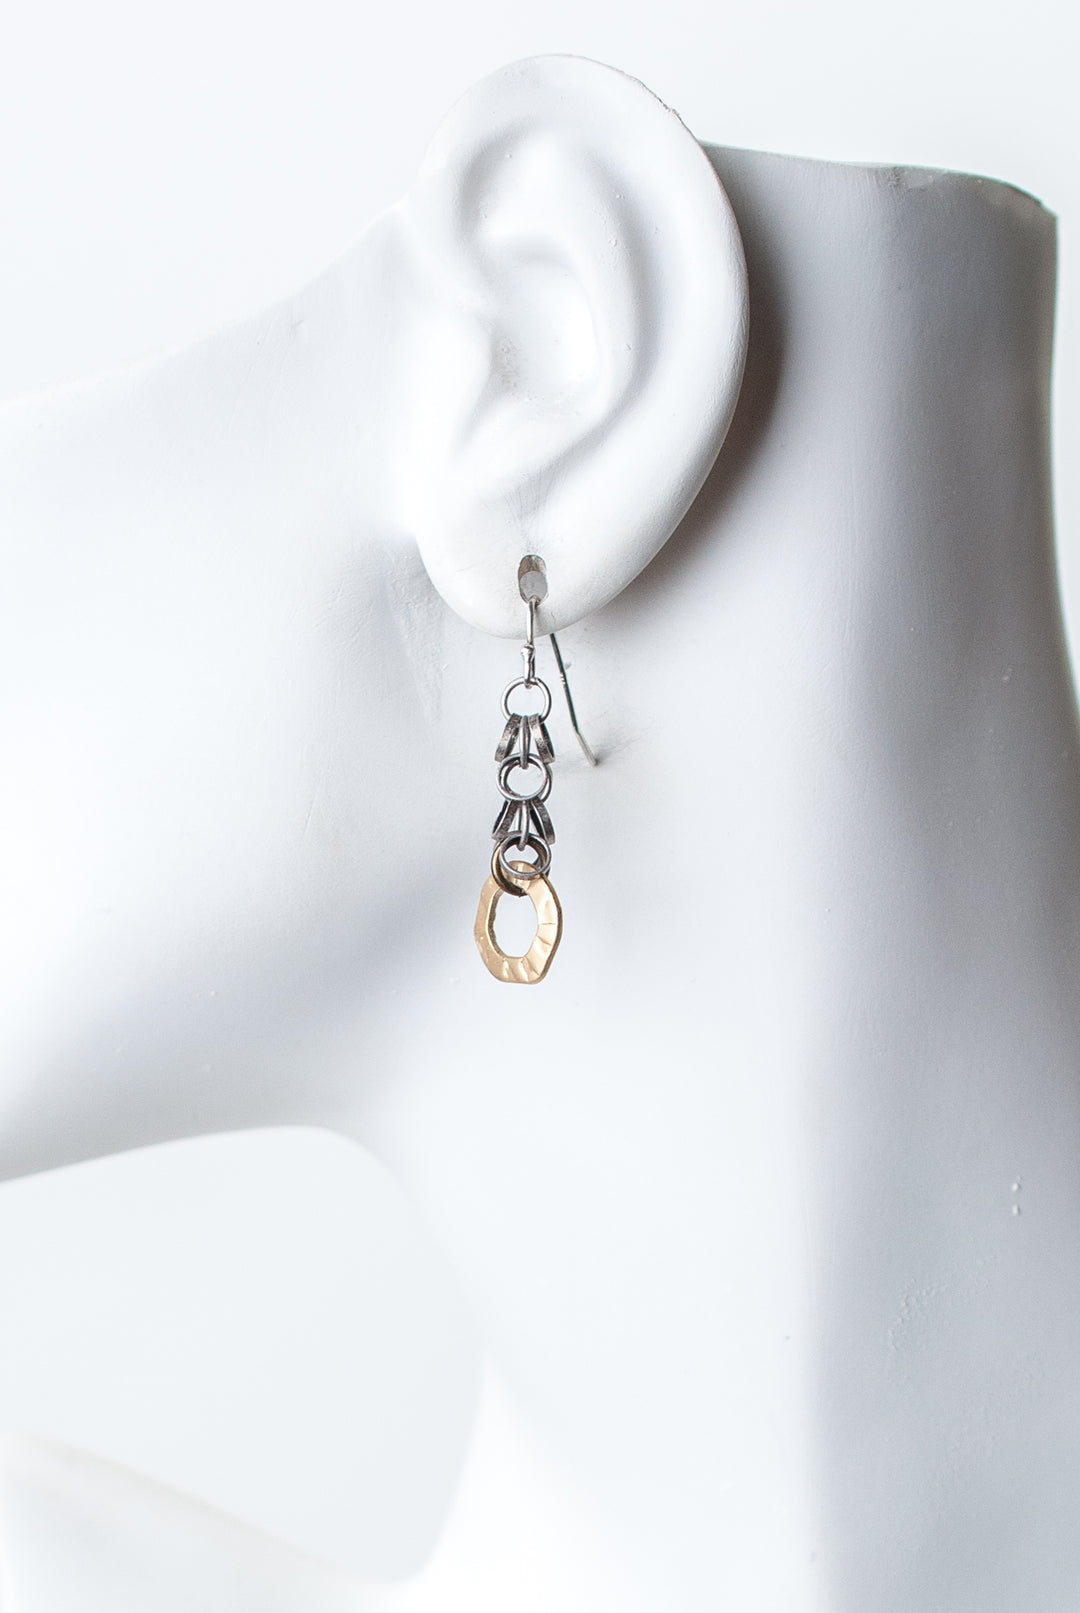 Silver & Gold Mixed Metal Earrings